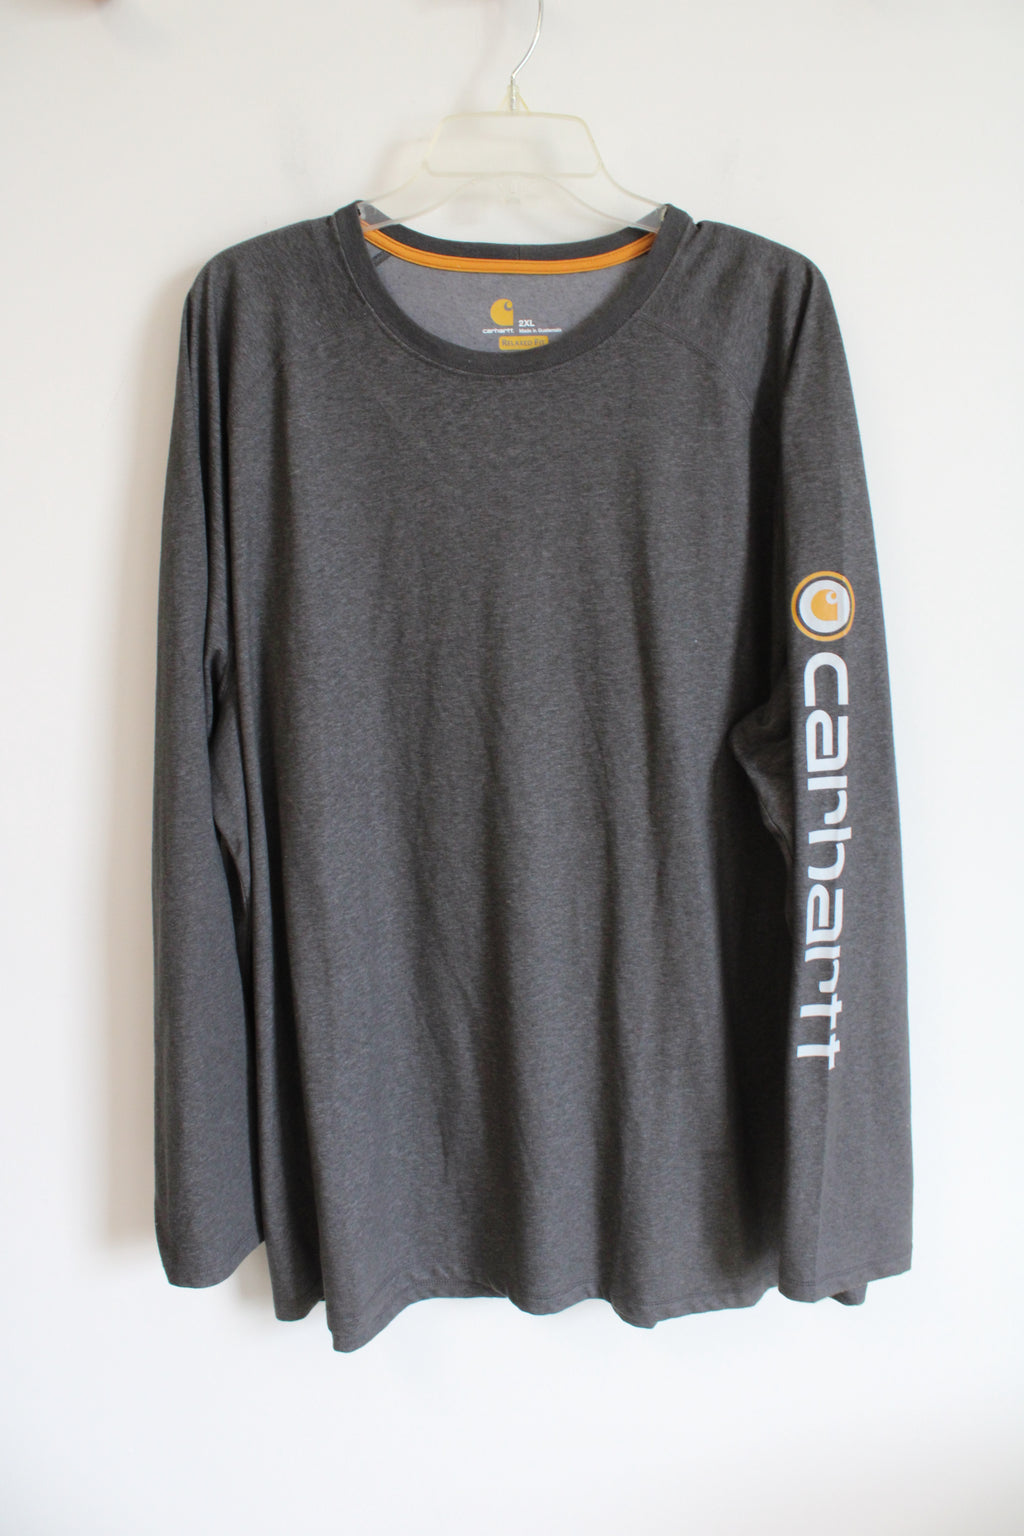 Carhartt Relaxed Fit Gray Long Sleeved Tee | 2XL